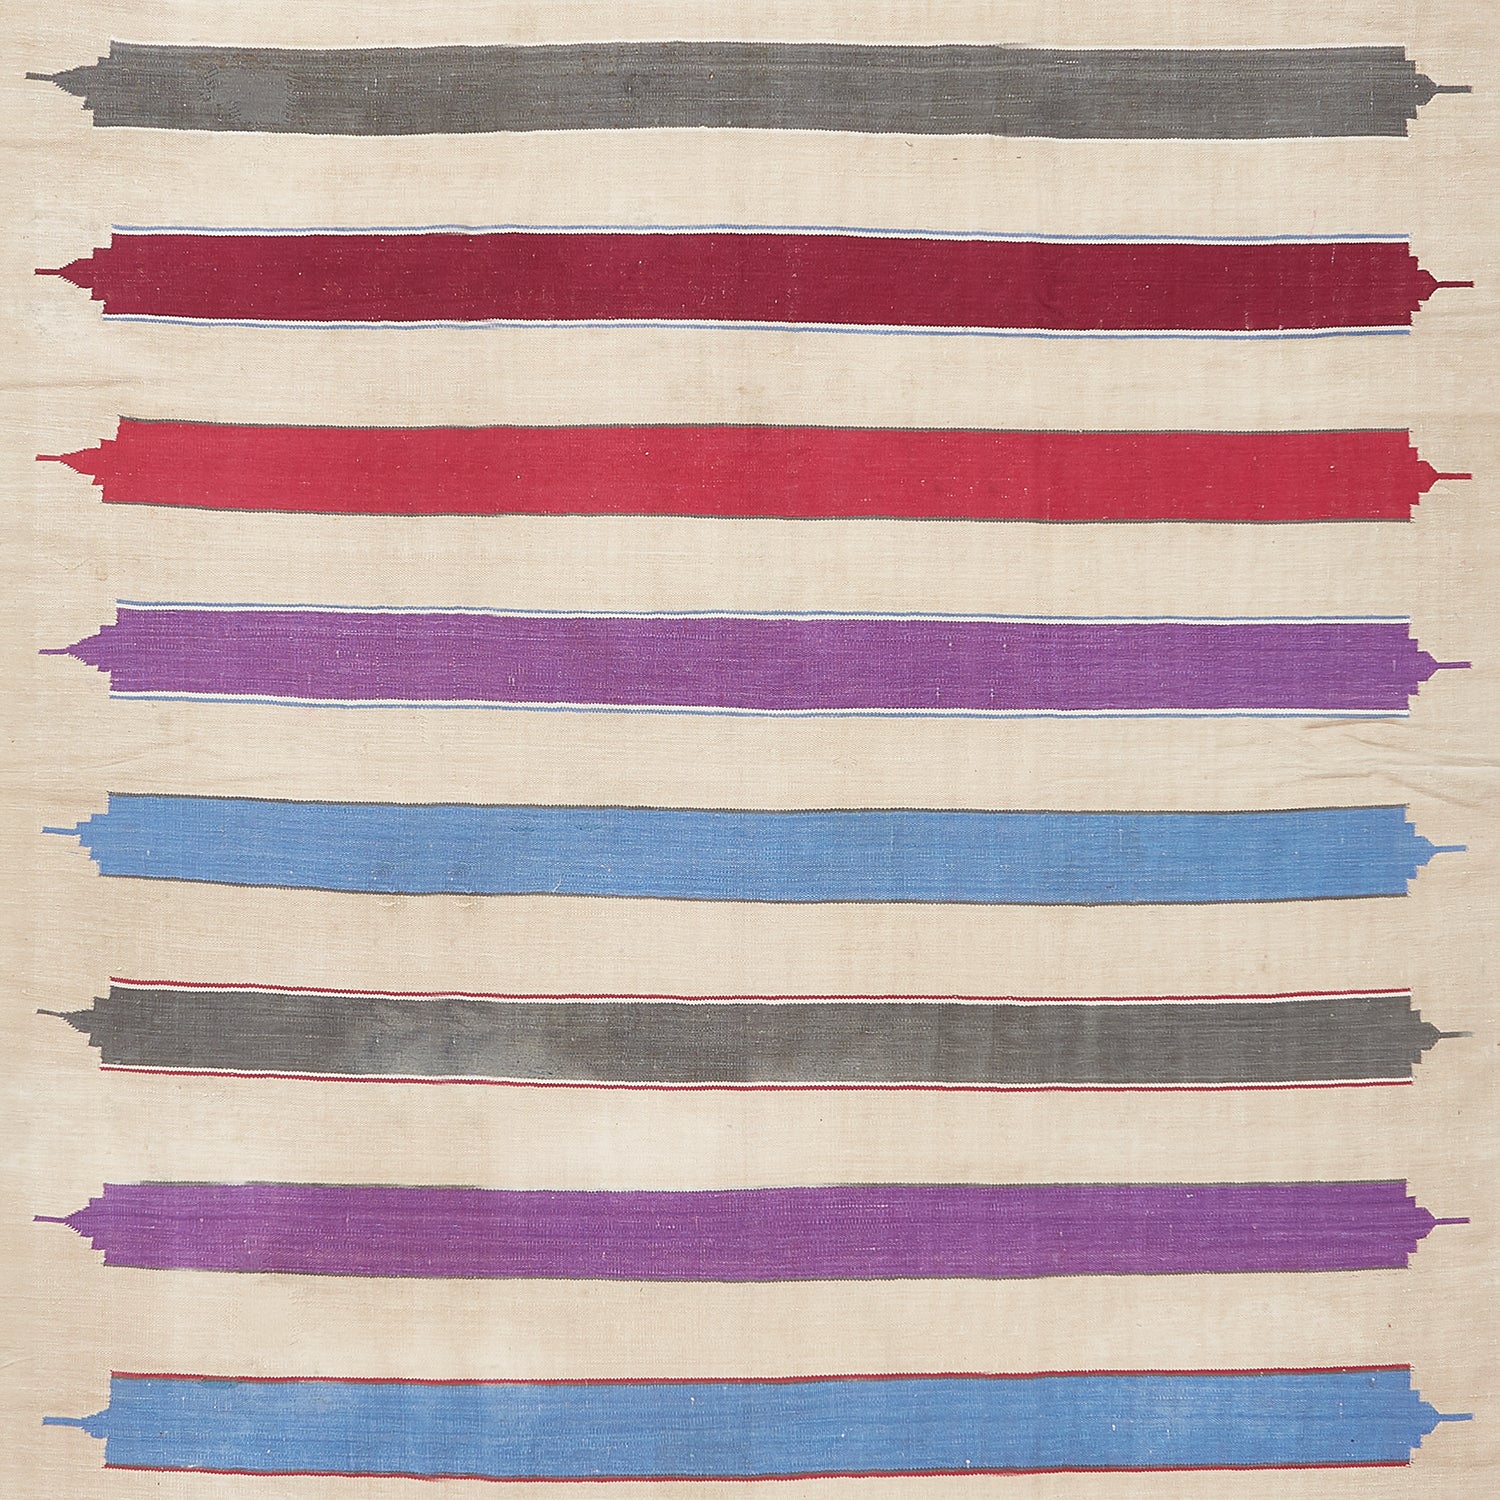 Textile with raw-edged, multi-colored stripes in varying widths and textures.